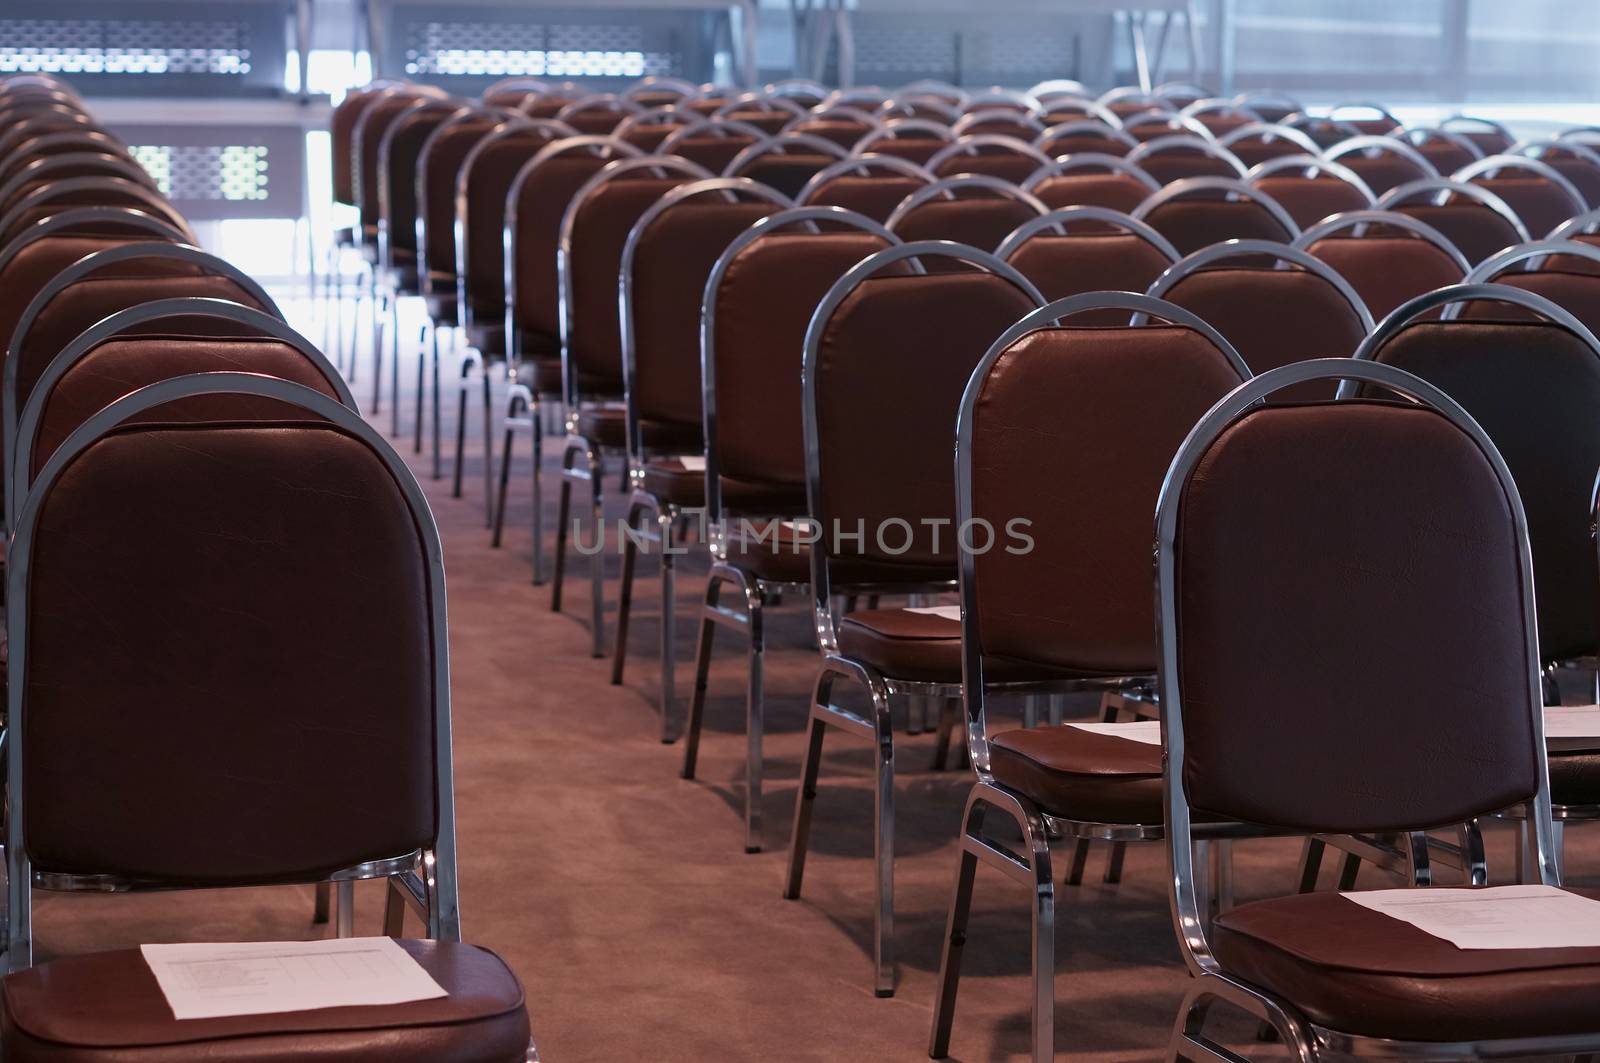 Many of brown chairs was placed in lobby for conference.